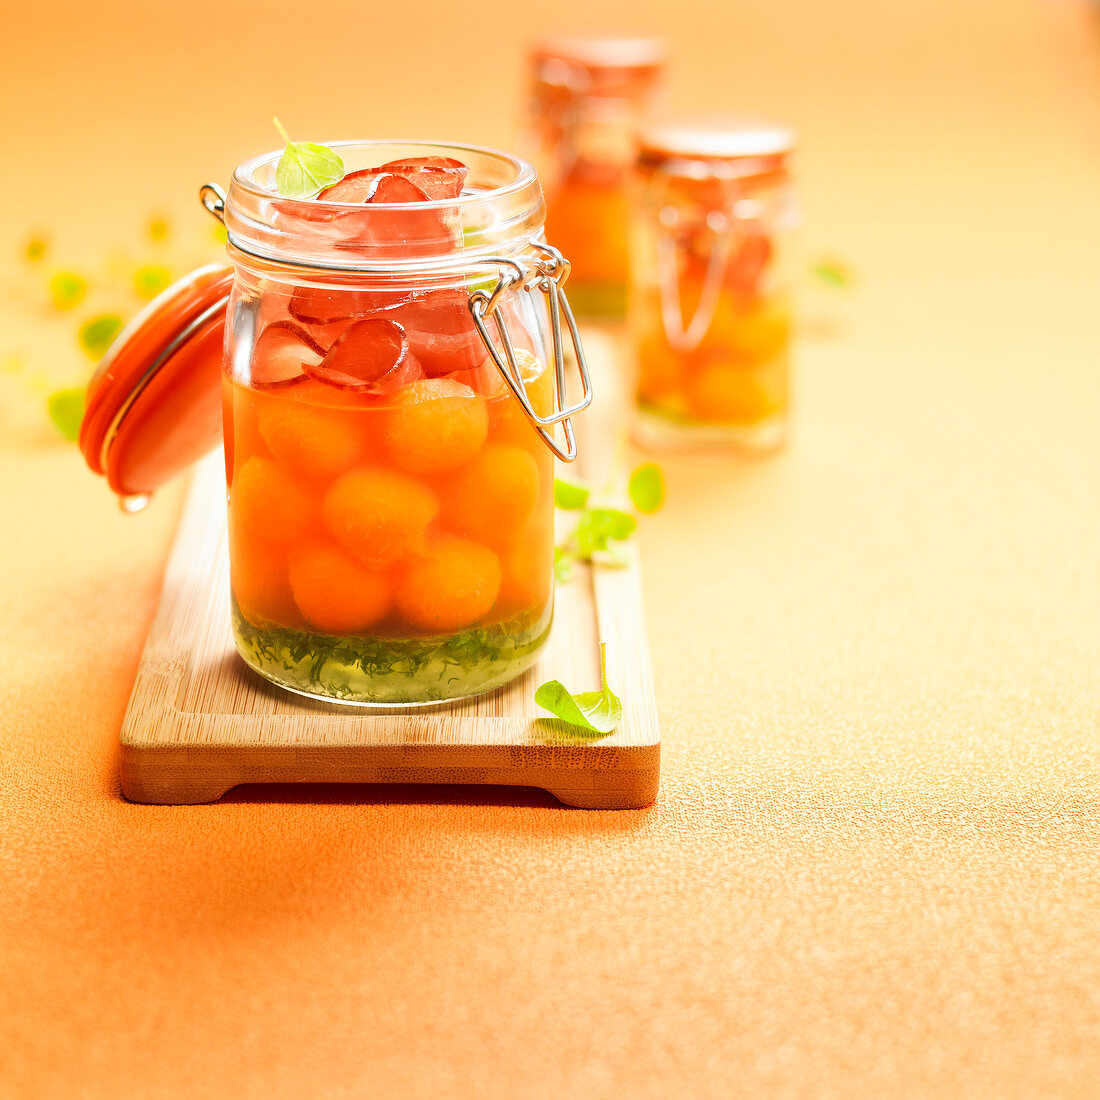 Melon ball salad with bacon and herb jelly